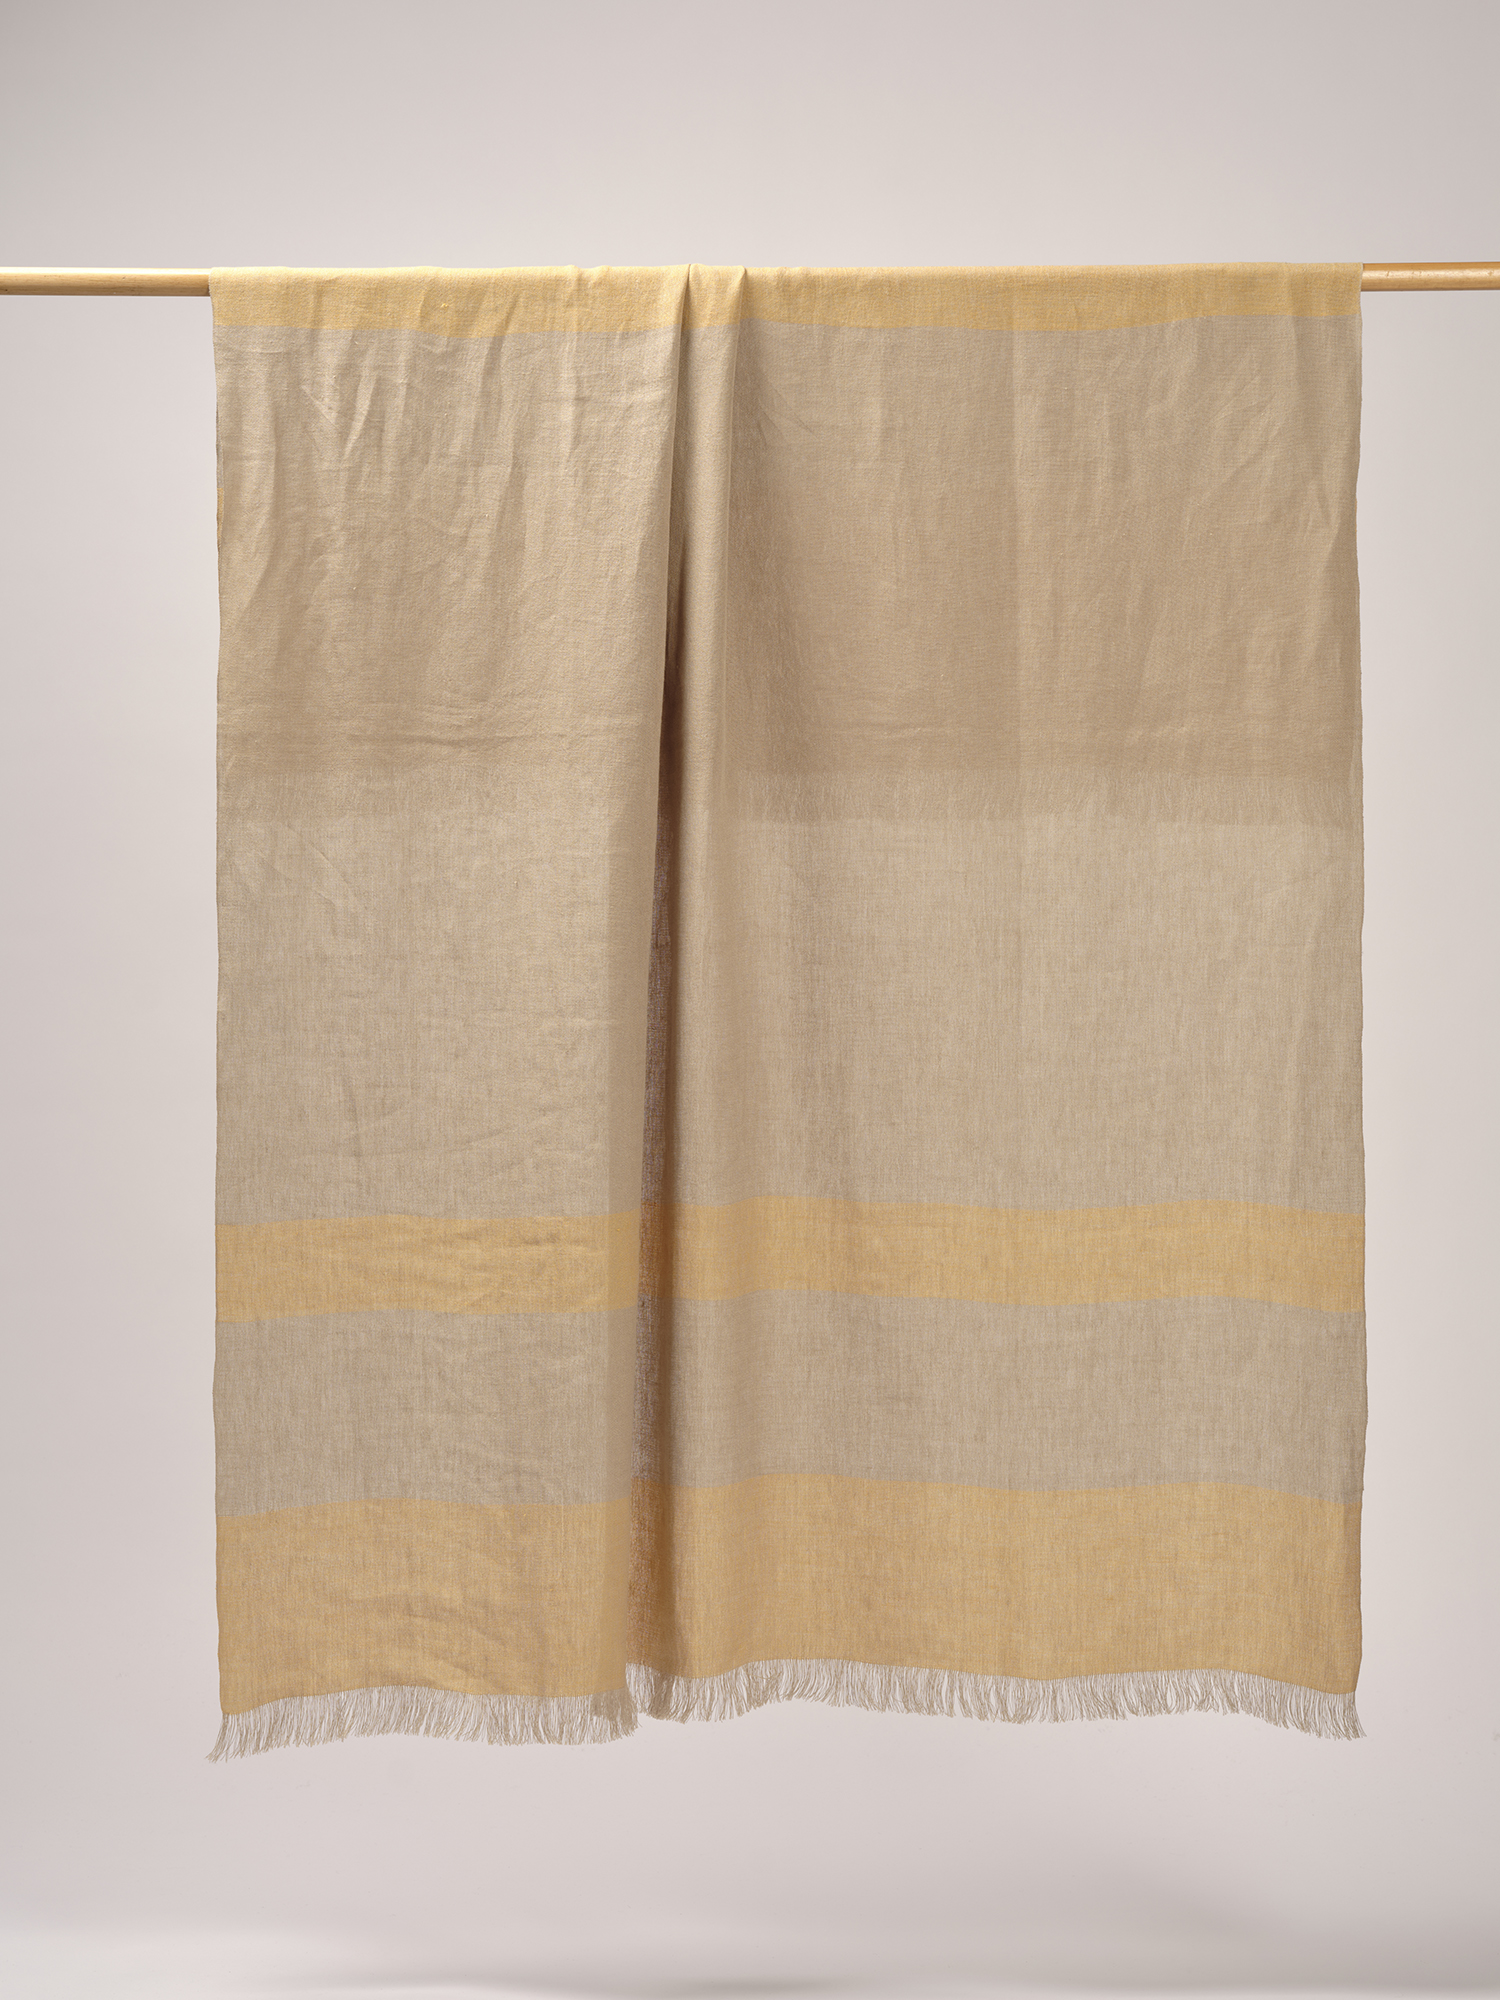 european linen throw in yellow and sandy color